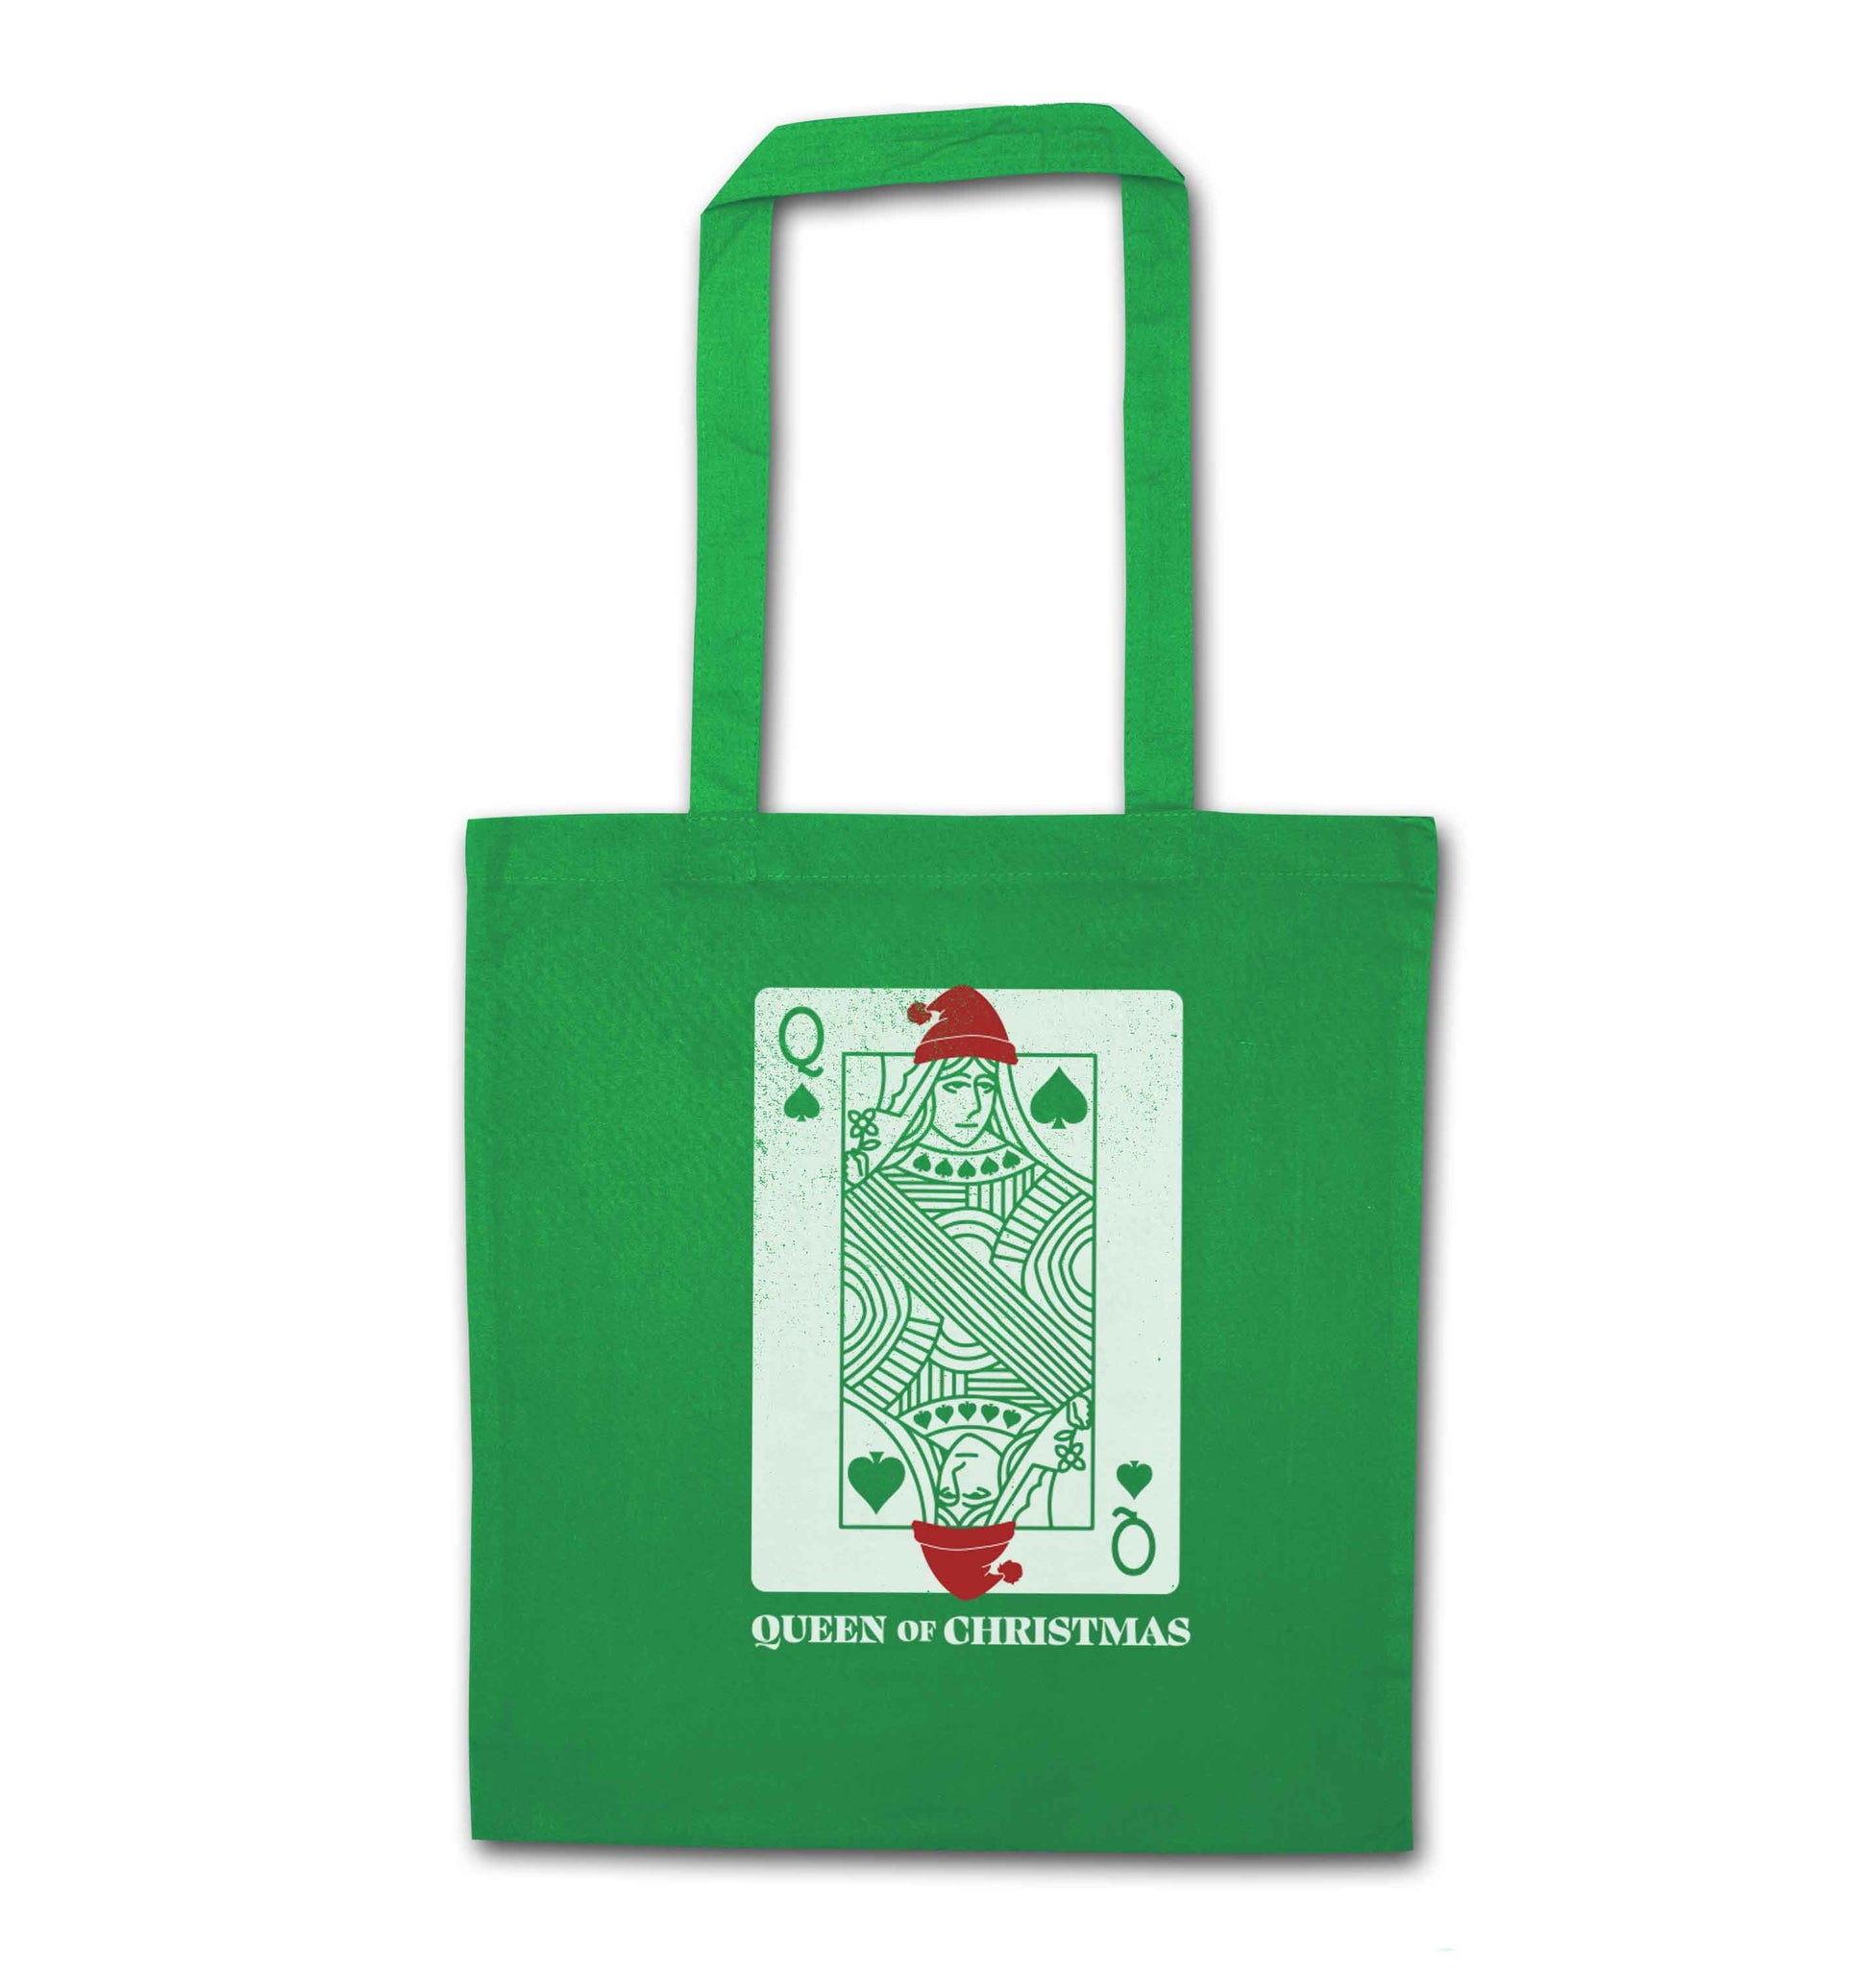 Queen of christmas green tote bag